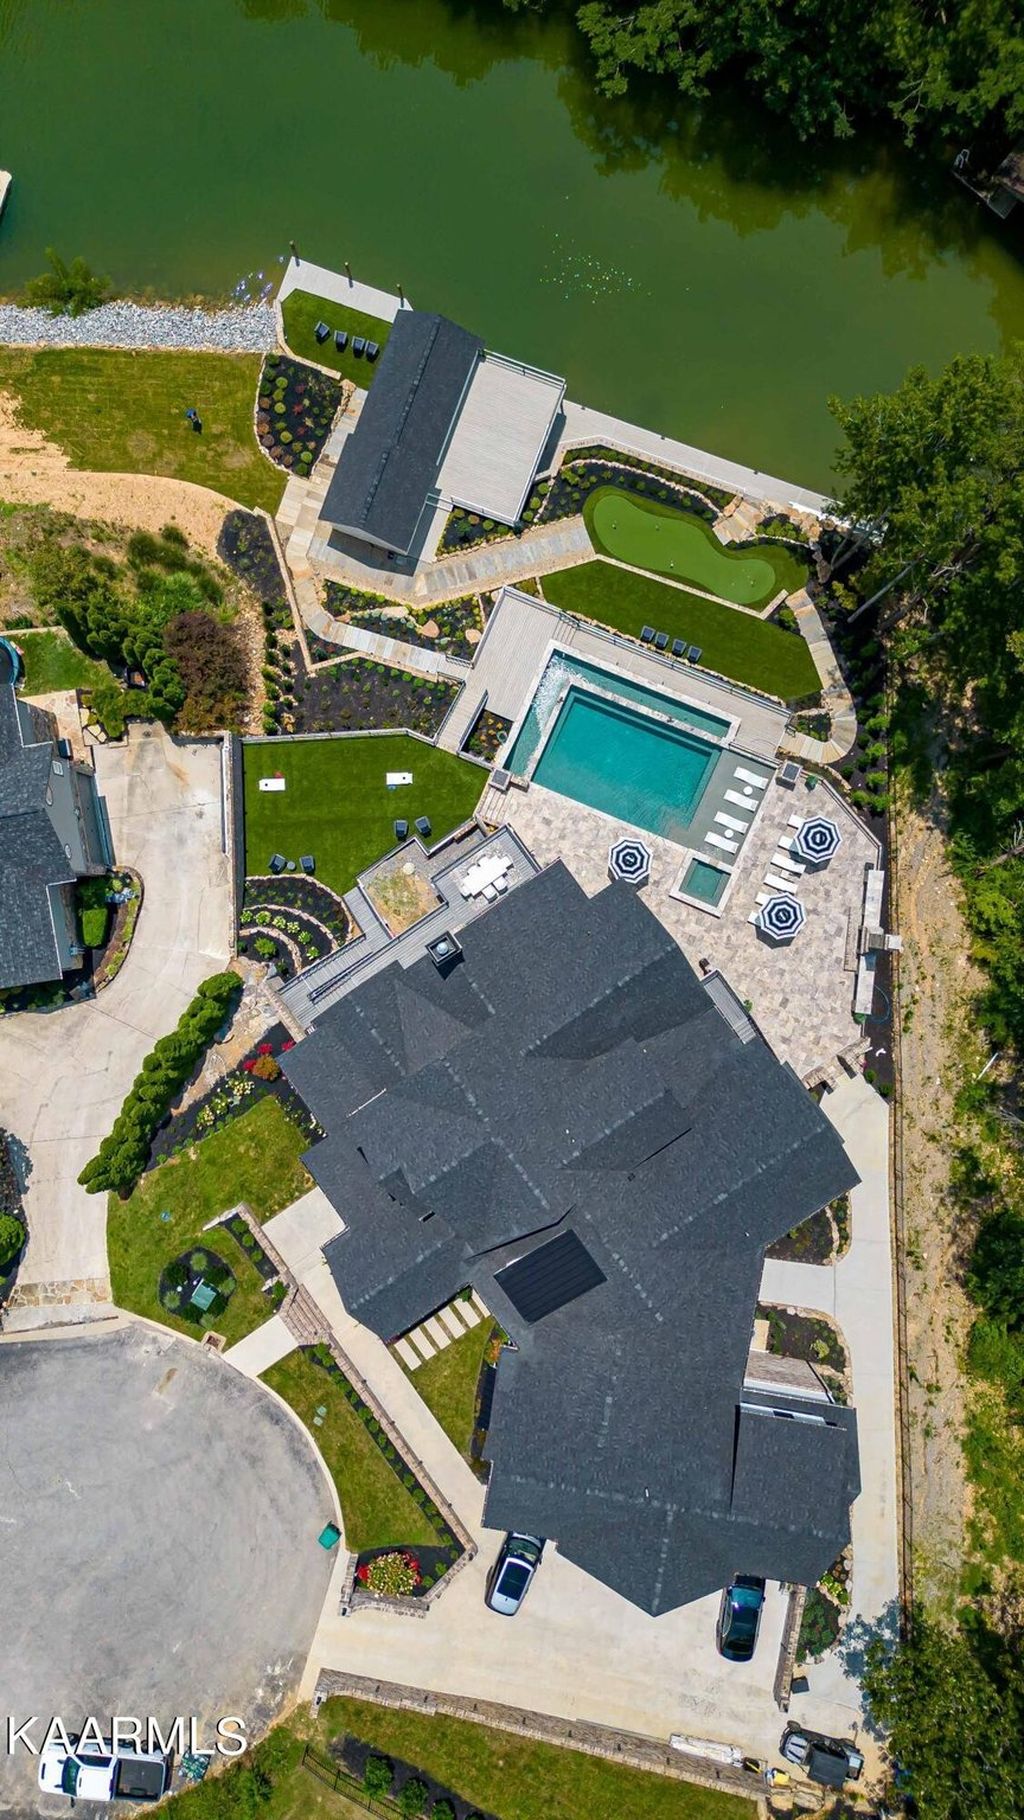 Awe inspiring residence with water views and privacy in knoxville tennessee listed at 5. 495 million 50